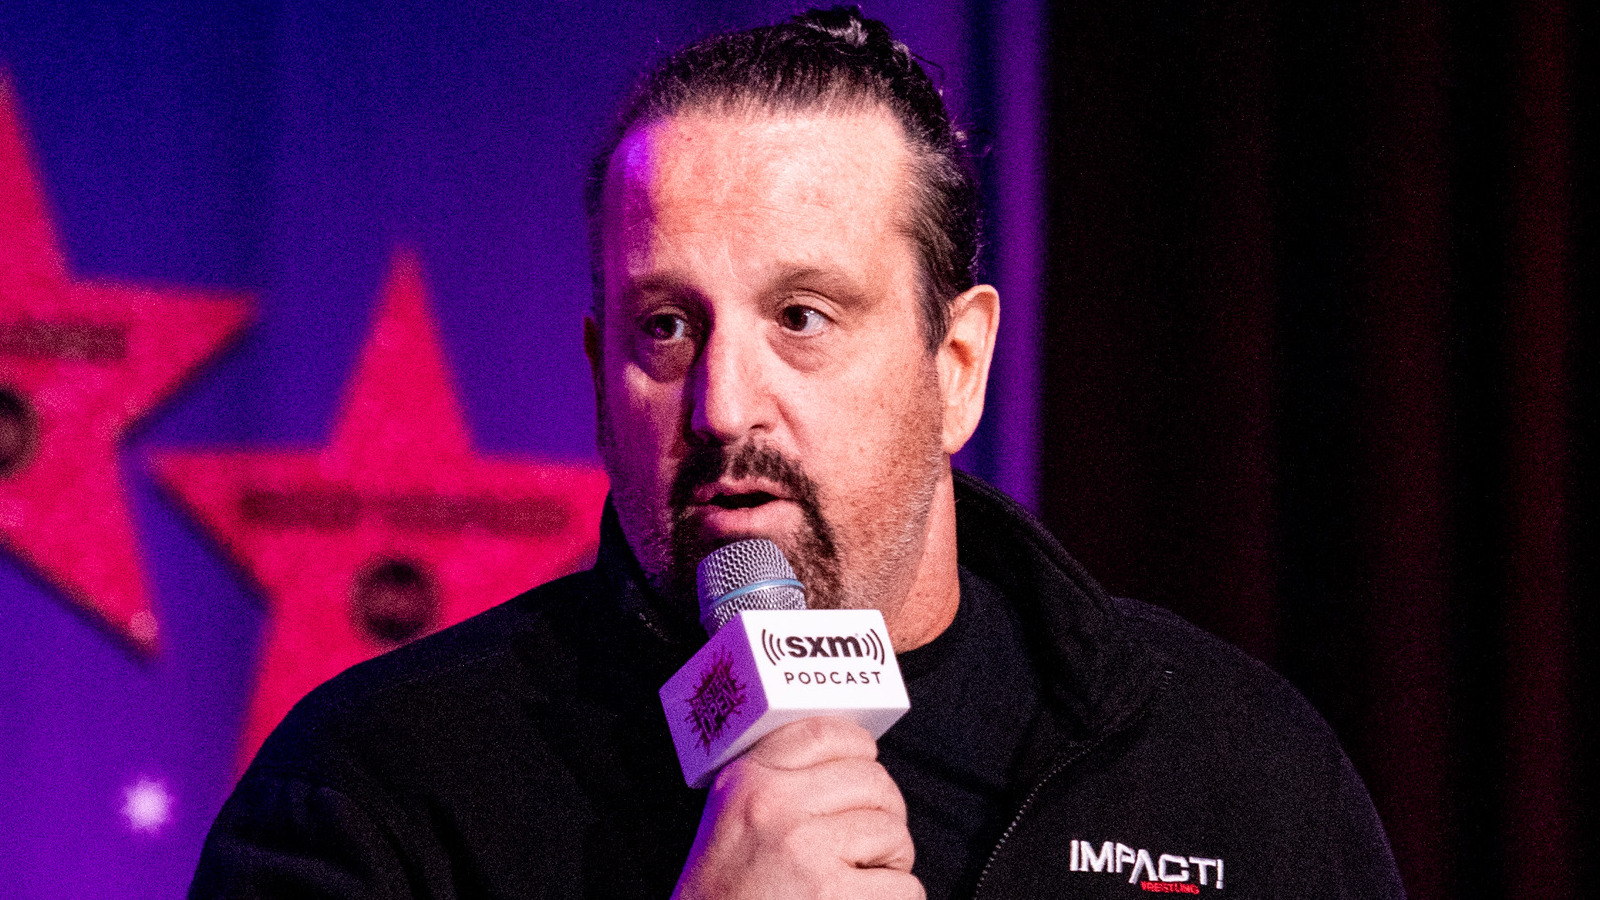 Tommy Dreamer Comments On The Strategic Timing Of Lawsuit Against WWE's Vince McMahon